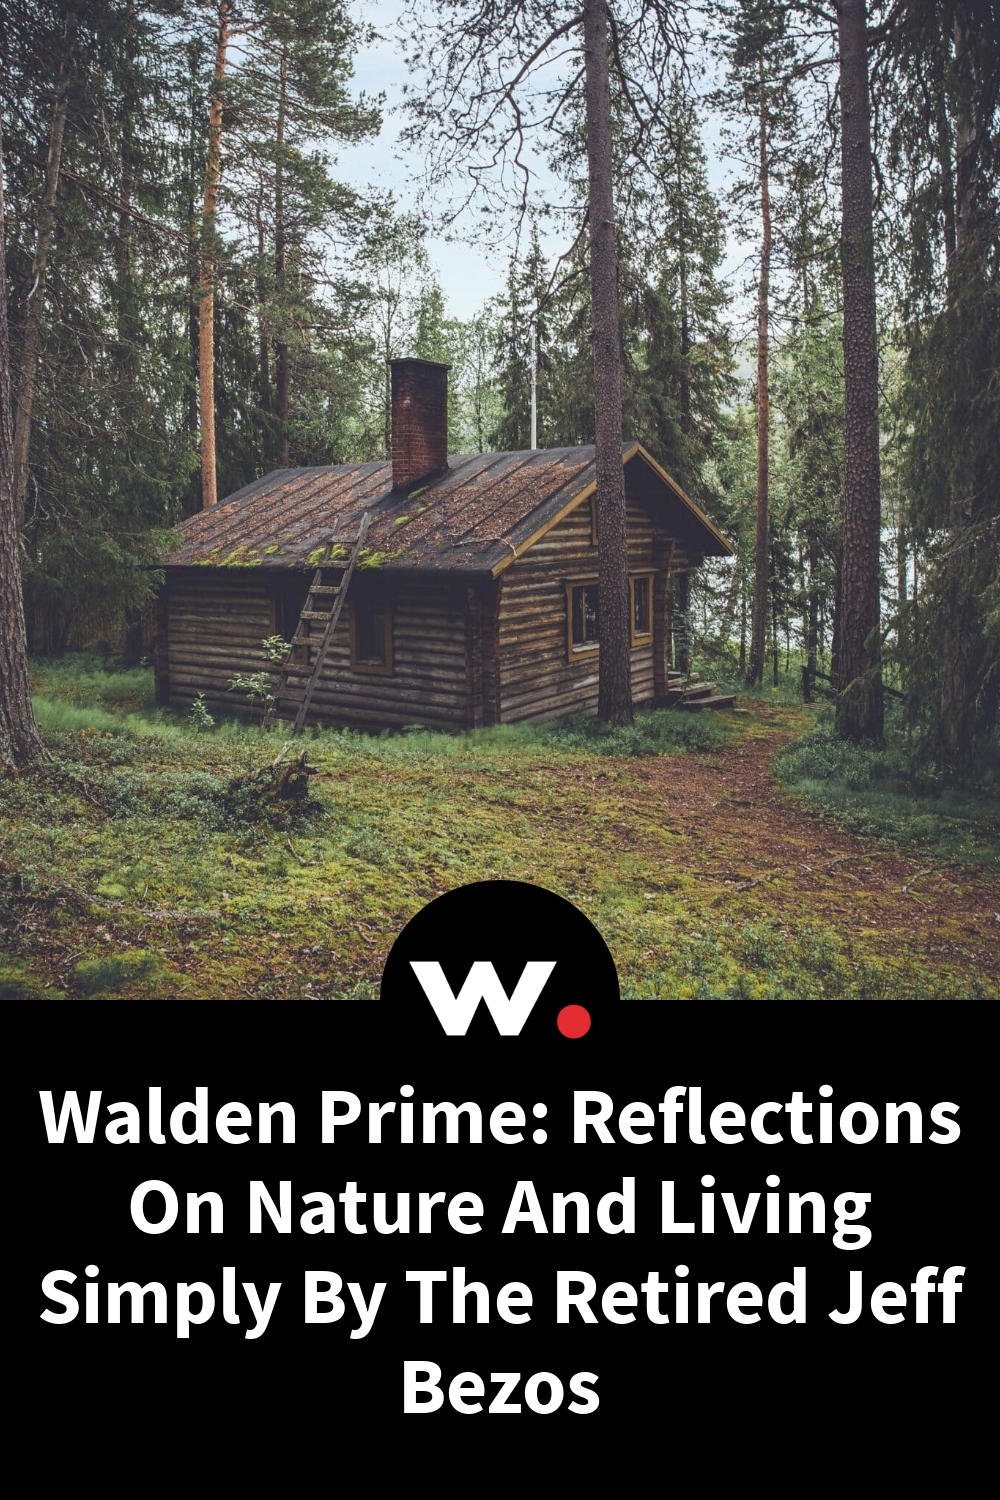 Walden Prime: Reflections On Nature And Living Simply By The Retired Jeff Bezos